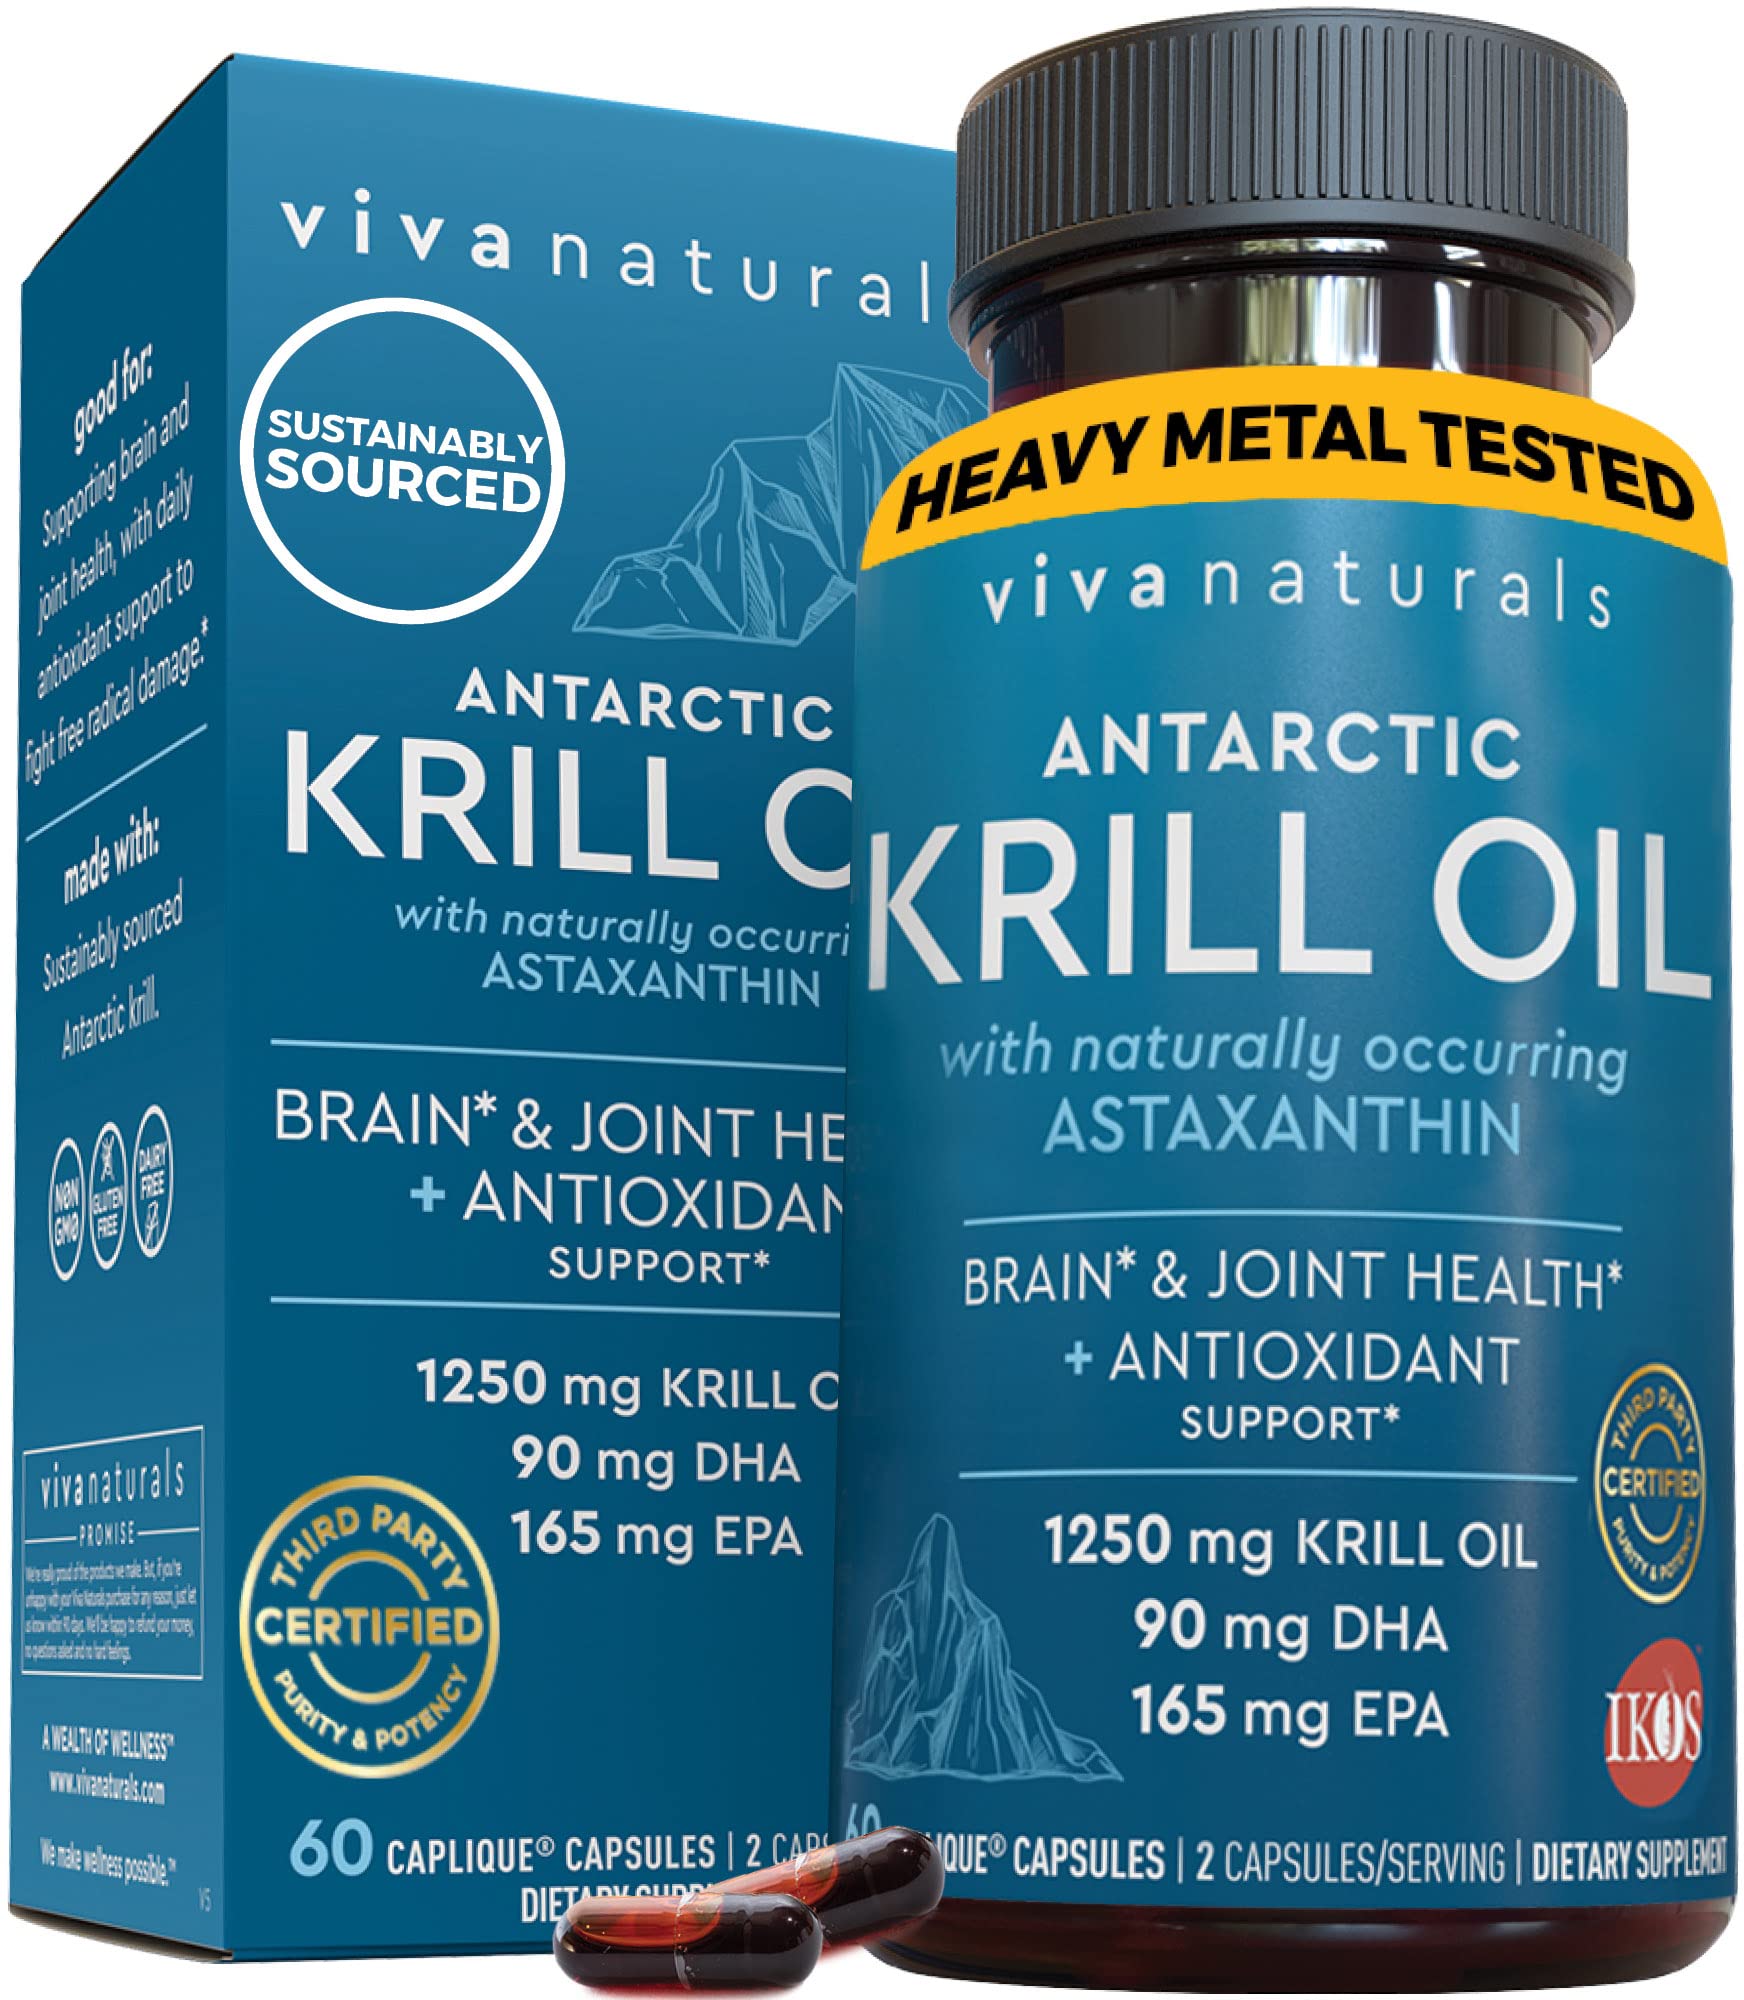 Book Cover Antarctic Krill Oil Omega 3 Fatty Acid Supplements 1250 mg, High Omega 3 EPA DHA and Astaxanthin Concentration, Joint Support and Brain Supplement with Antioxidant Properties, No Fish Burps, 60 Omega 3 Krill Oil Capsules 60 Count (Pack of 1)